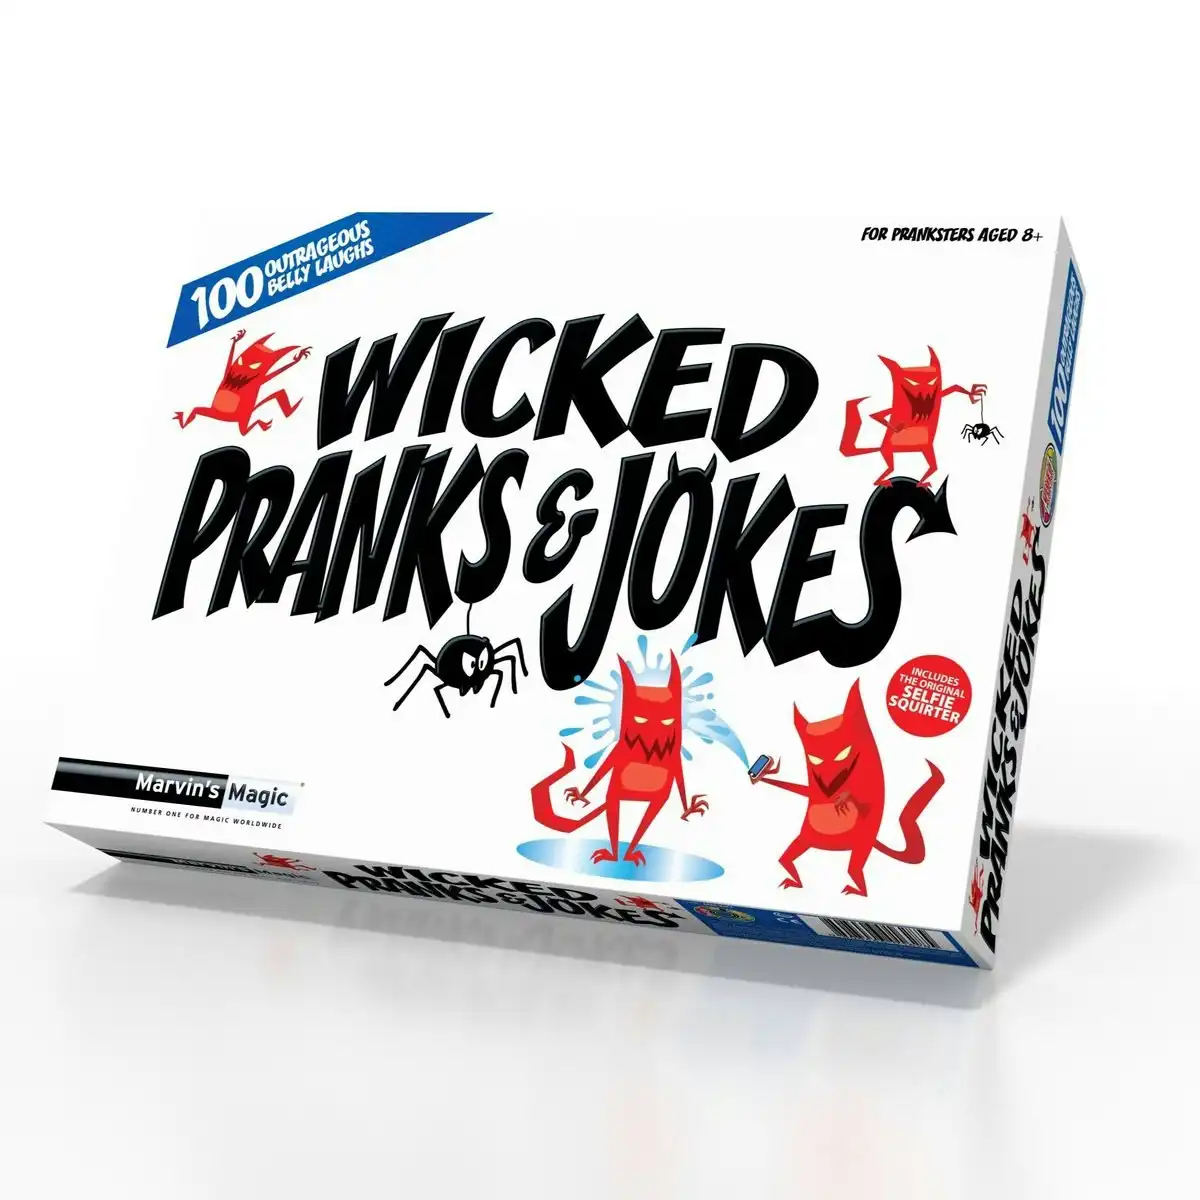 Marvins Magic - Wicked Pranks And Jokes Collection